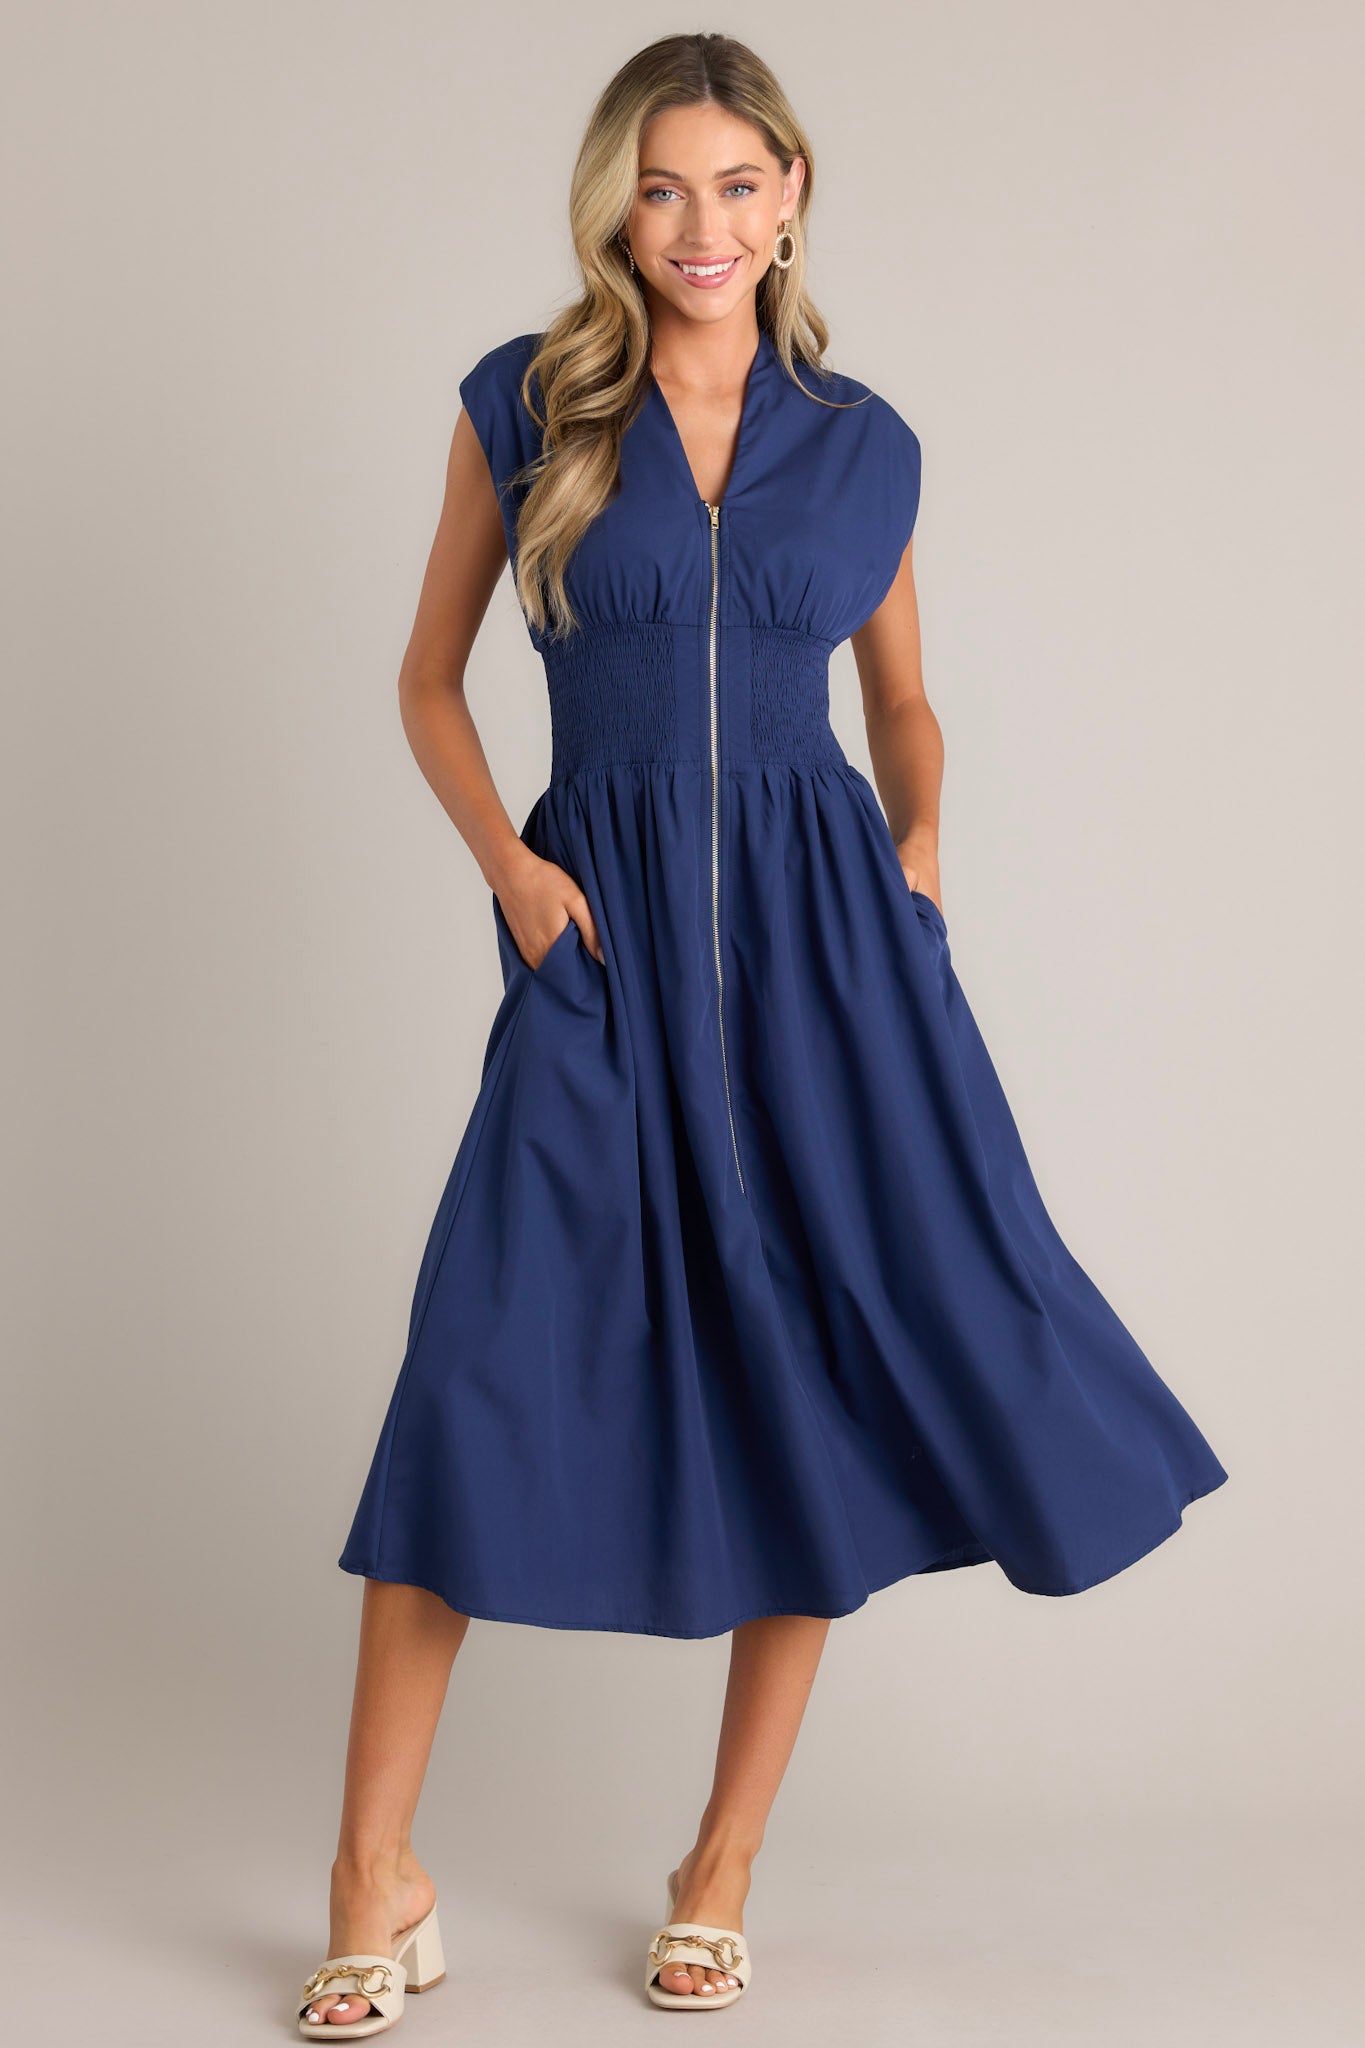 Full body view of a navy blue dress with a V-neckline, cap sleeves, a zippered front, and a cinched waist with shirred detailing, featuring a flowing skirt and side pockets.